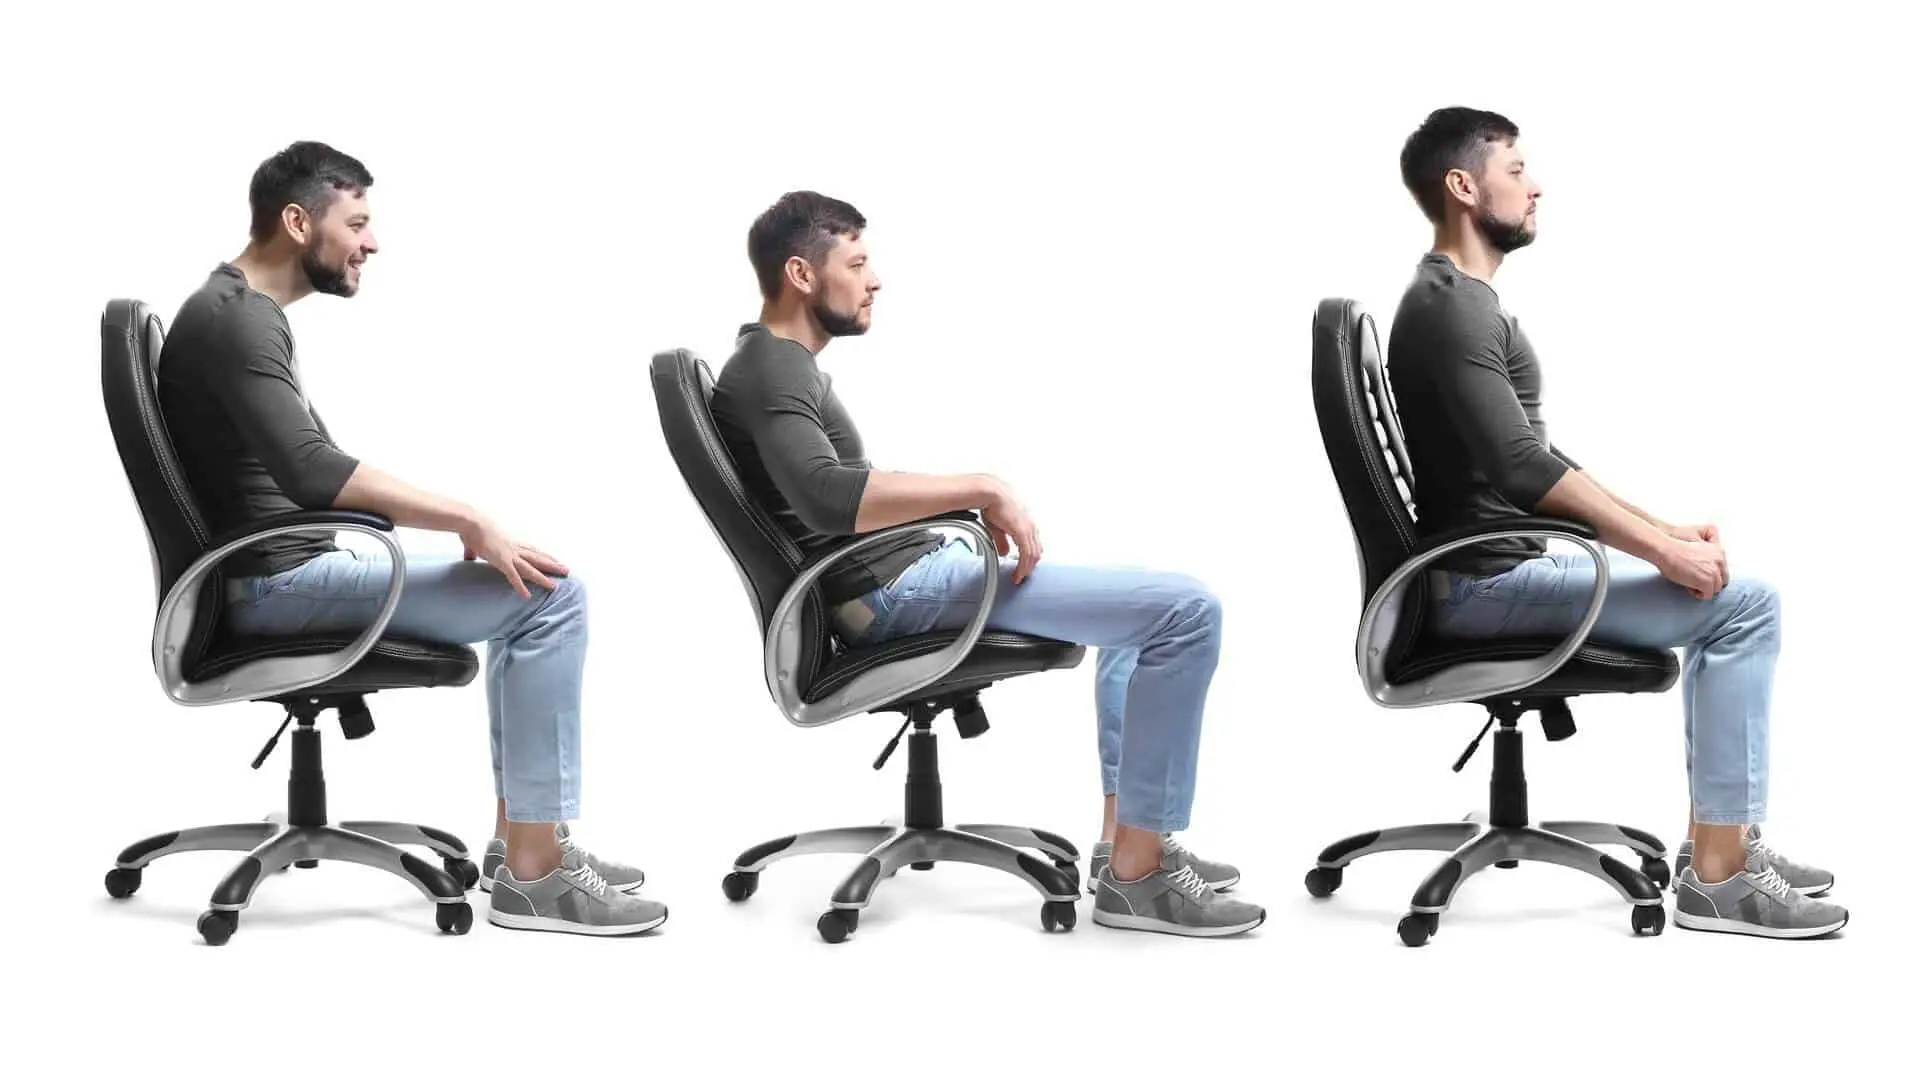 Spondylolisthesis can be aggrivated by poor posture in your chair